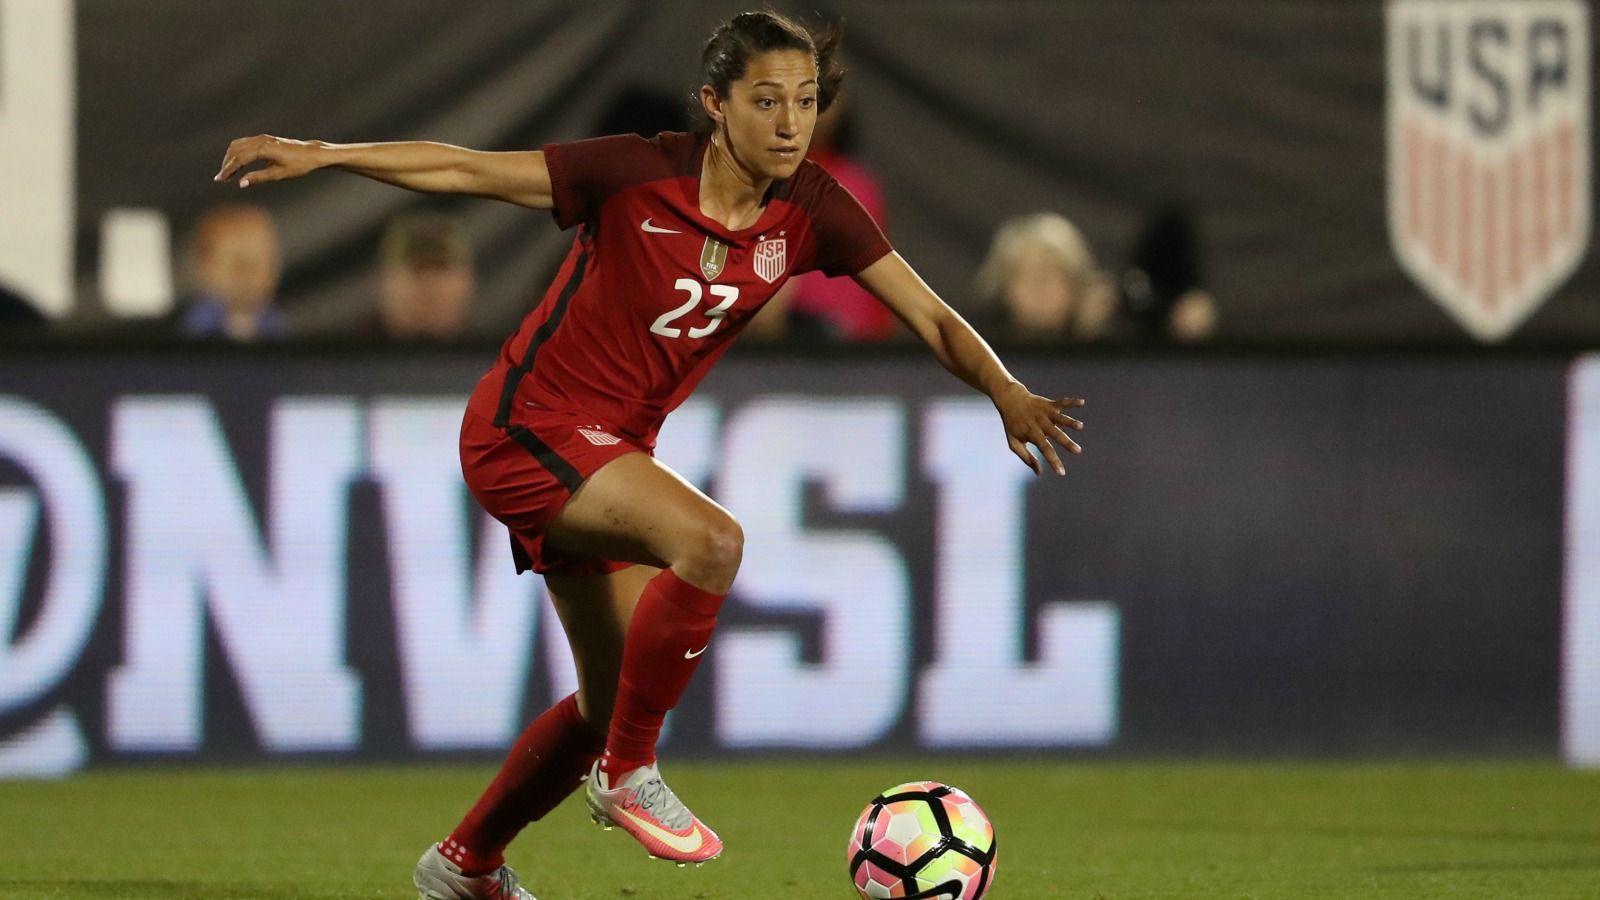 Uswnt To Host Summer Tournament With Some Of World's